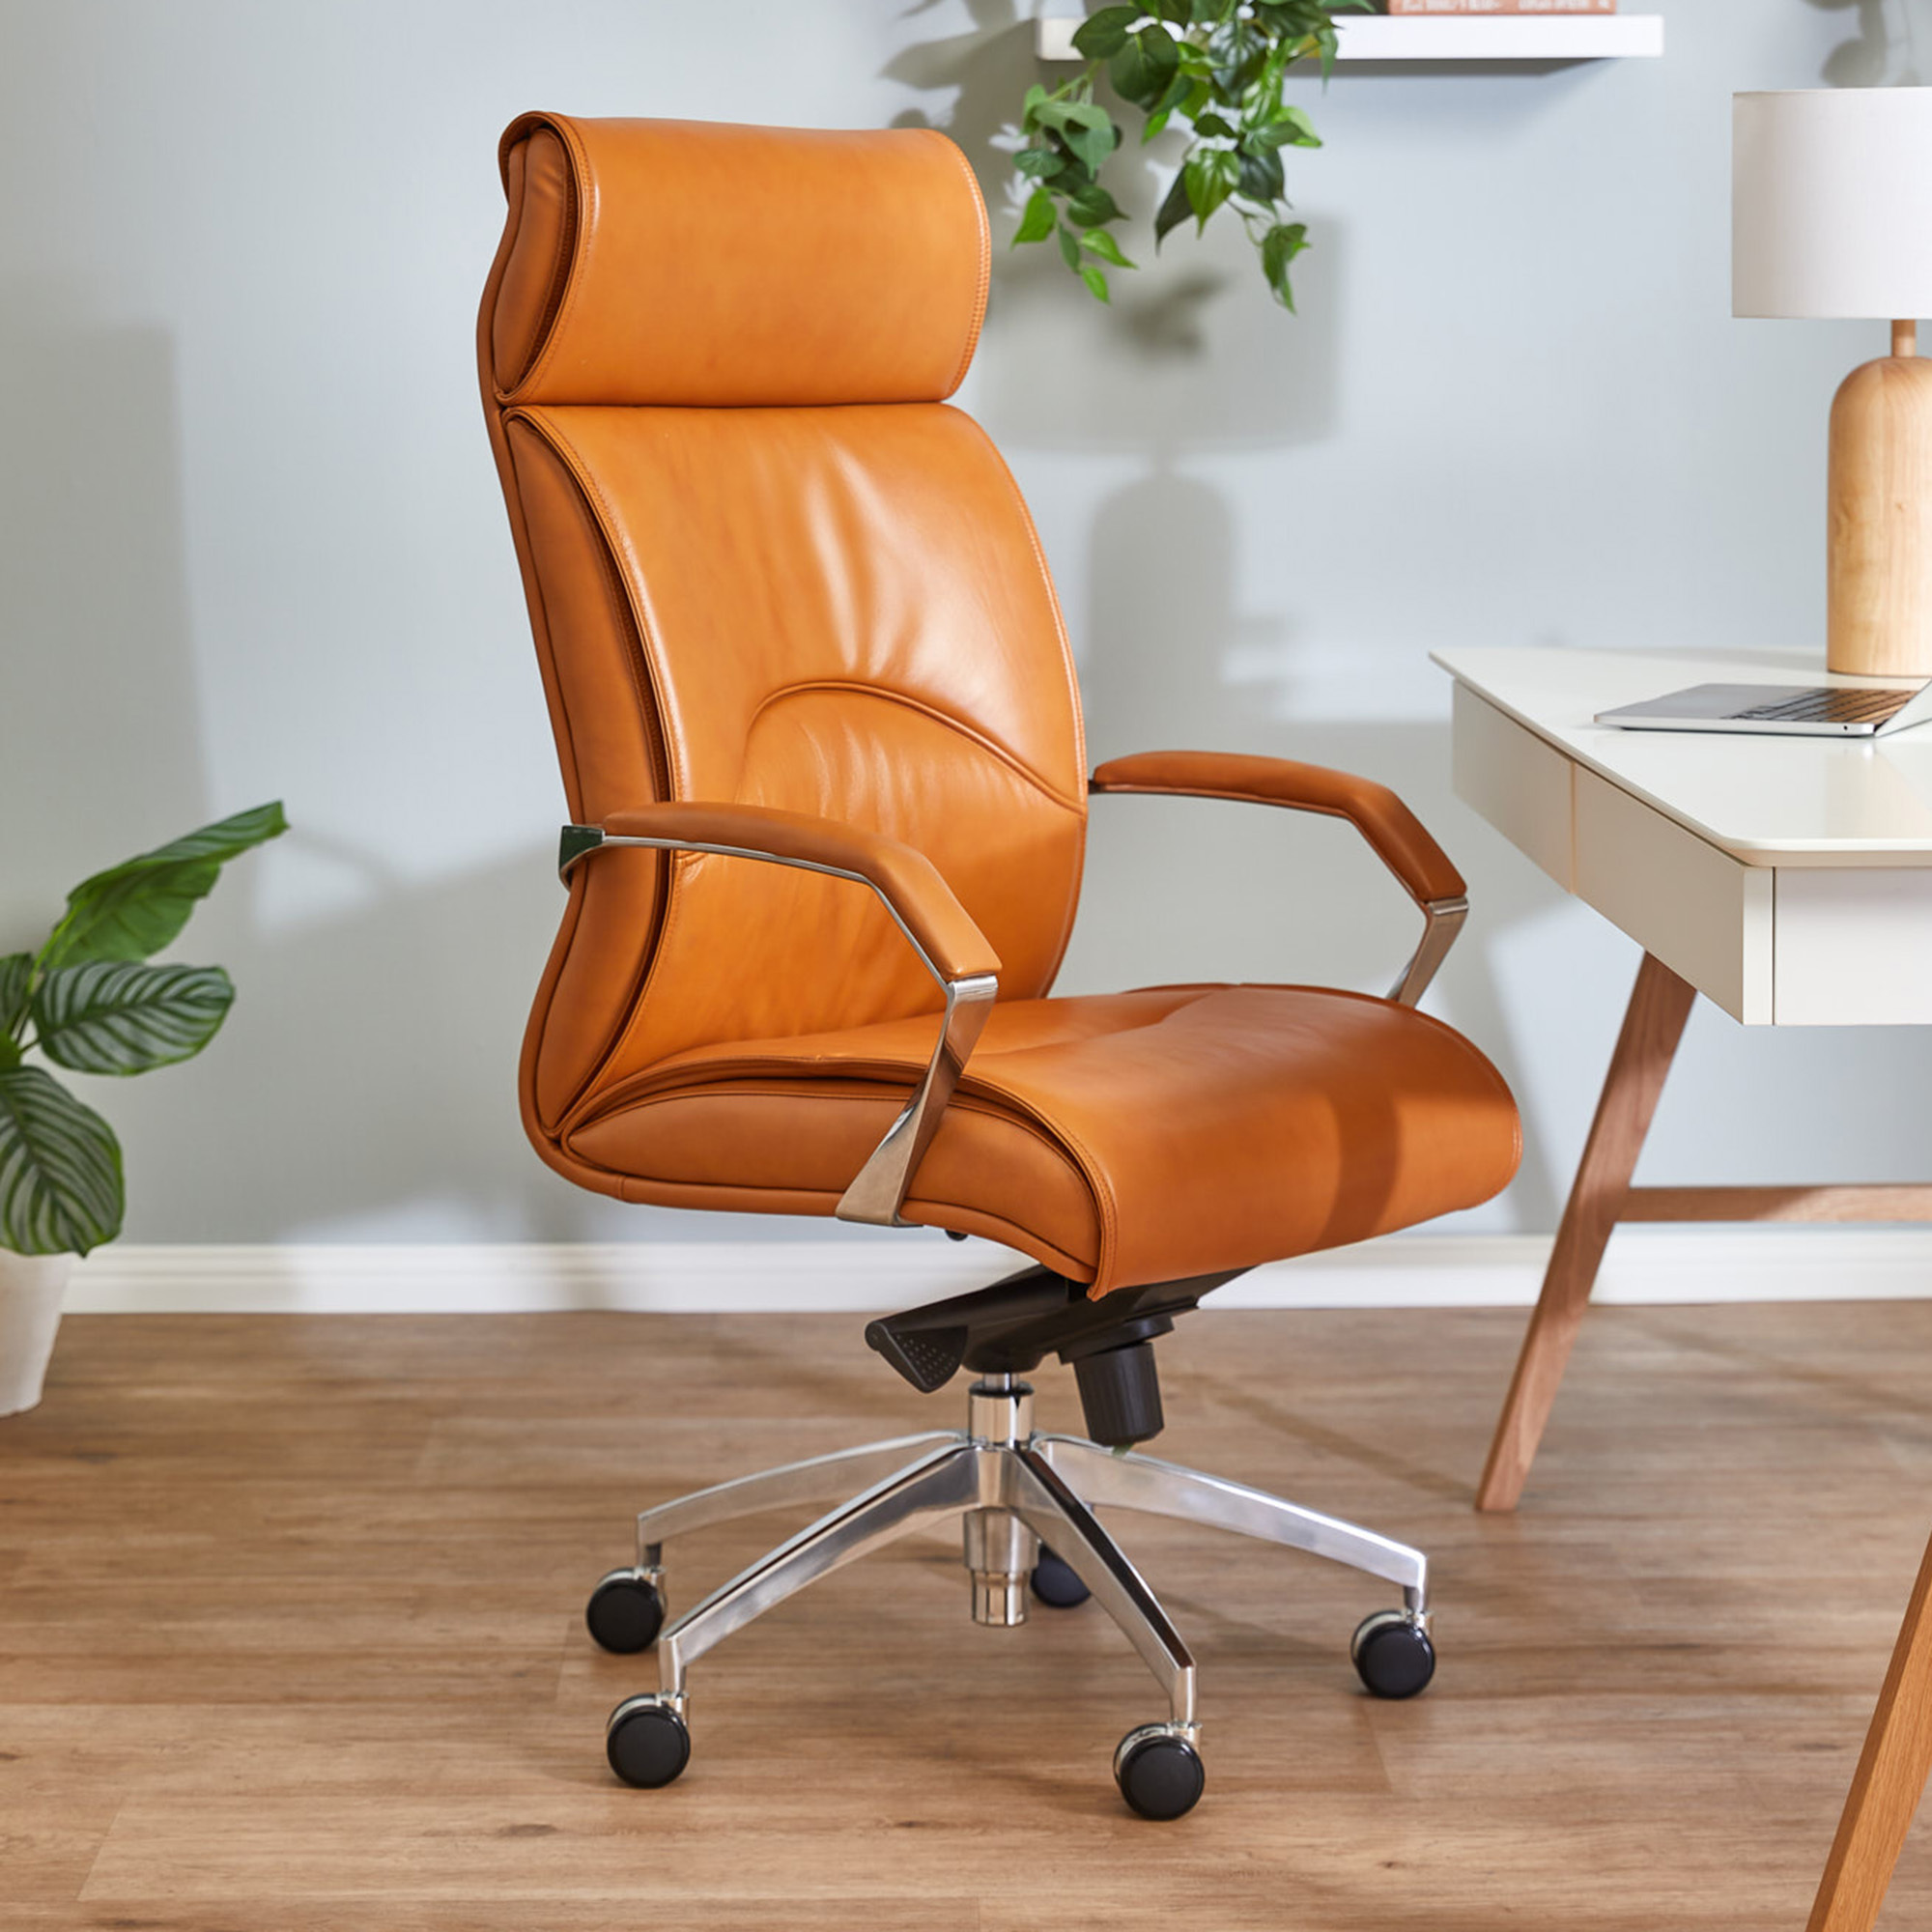 Temple & Webster Hannon Leather Executive Office Chair